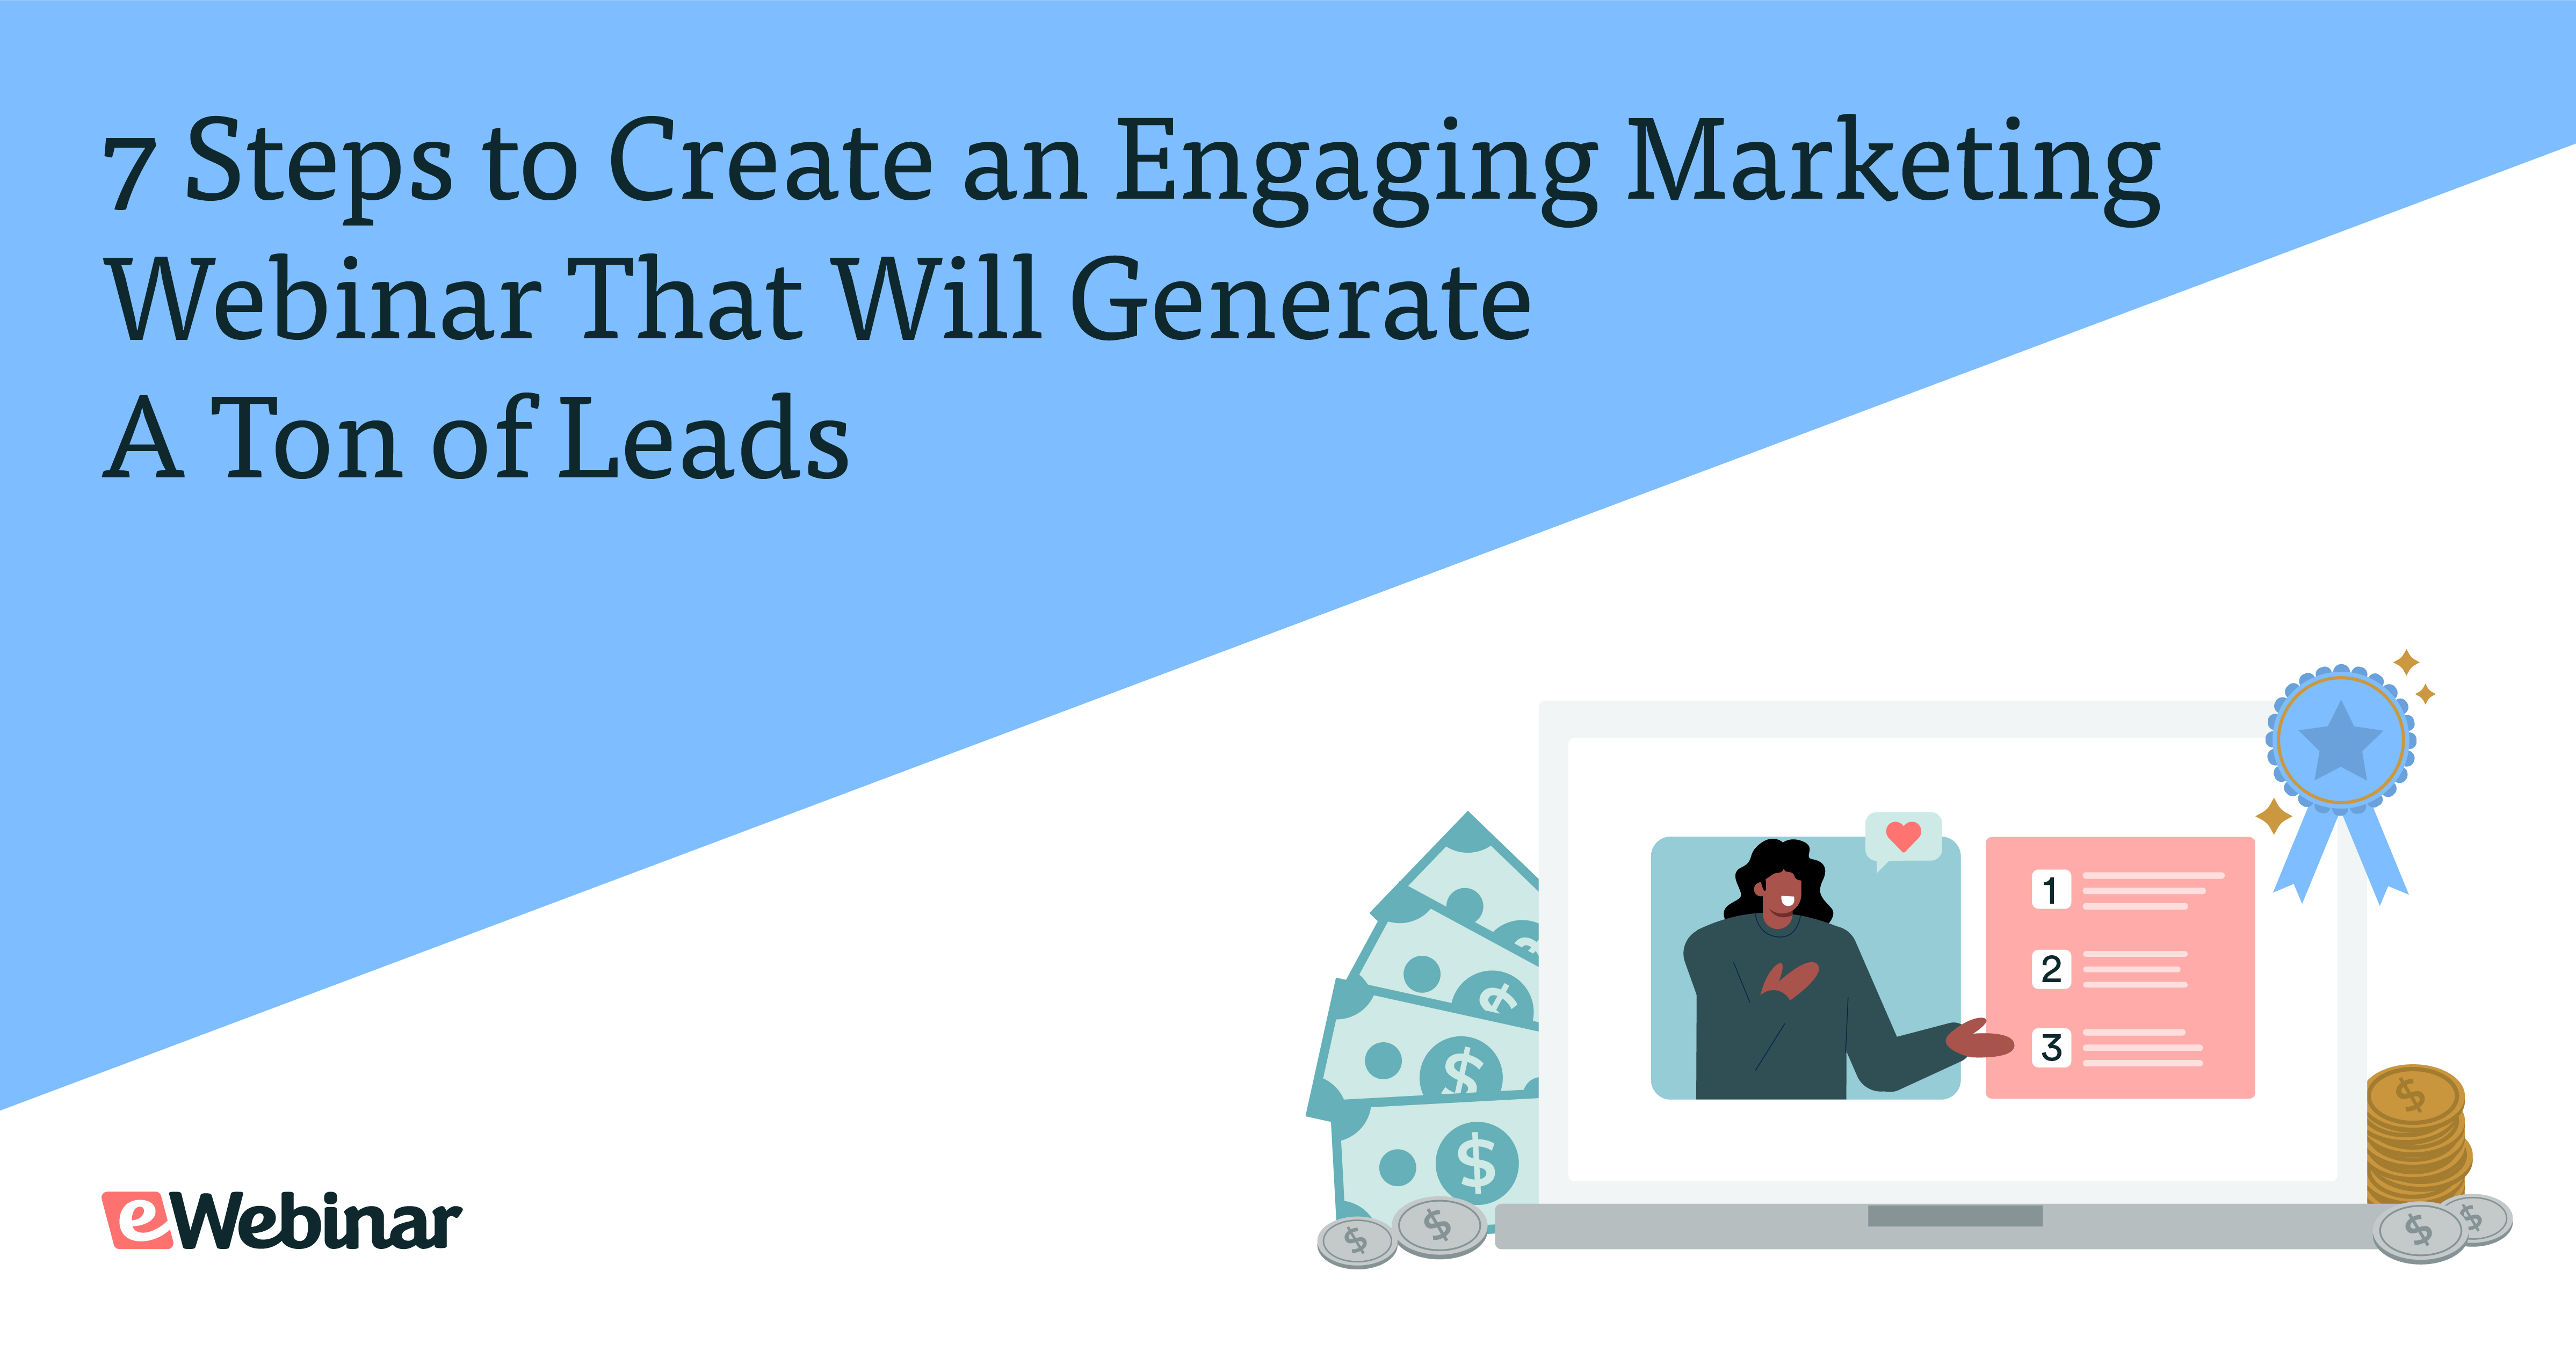 7 Steps to Create an Engaging Marketing Webinar That Will Generate a Ton of Leads